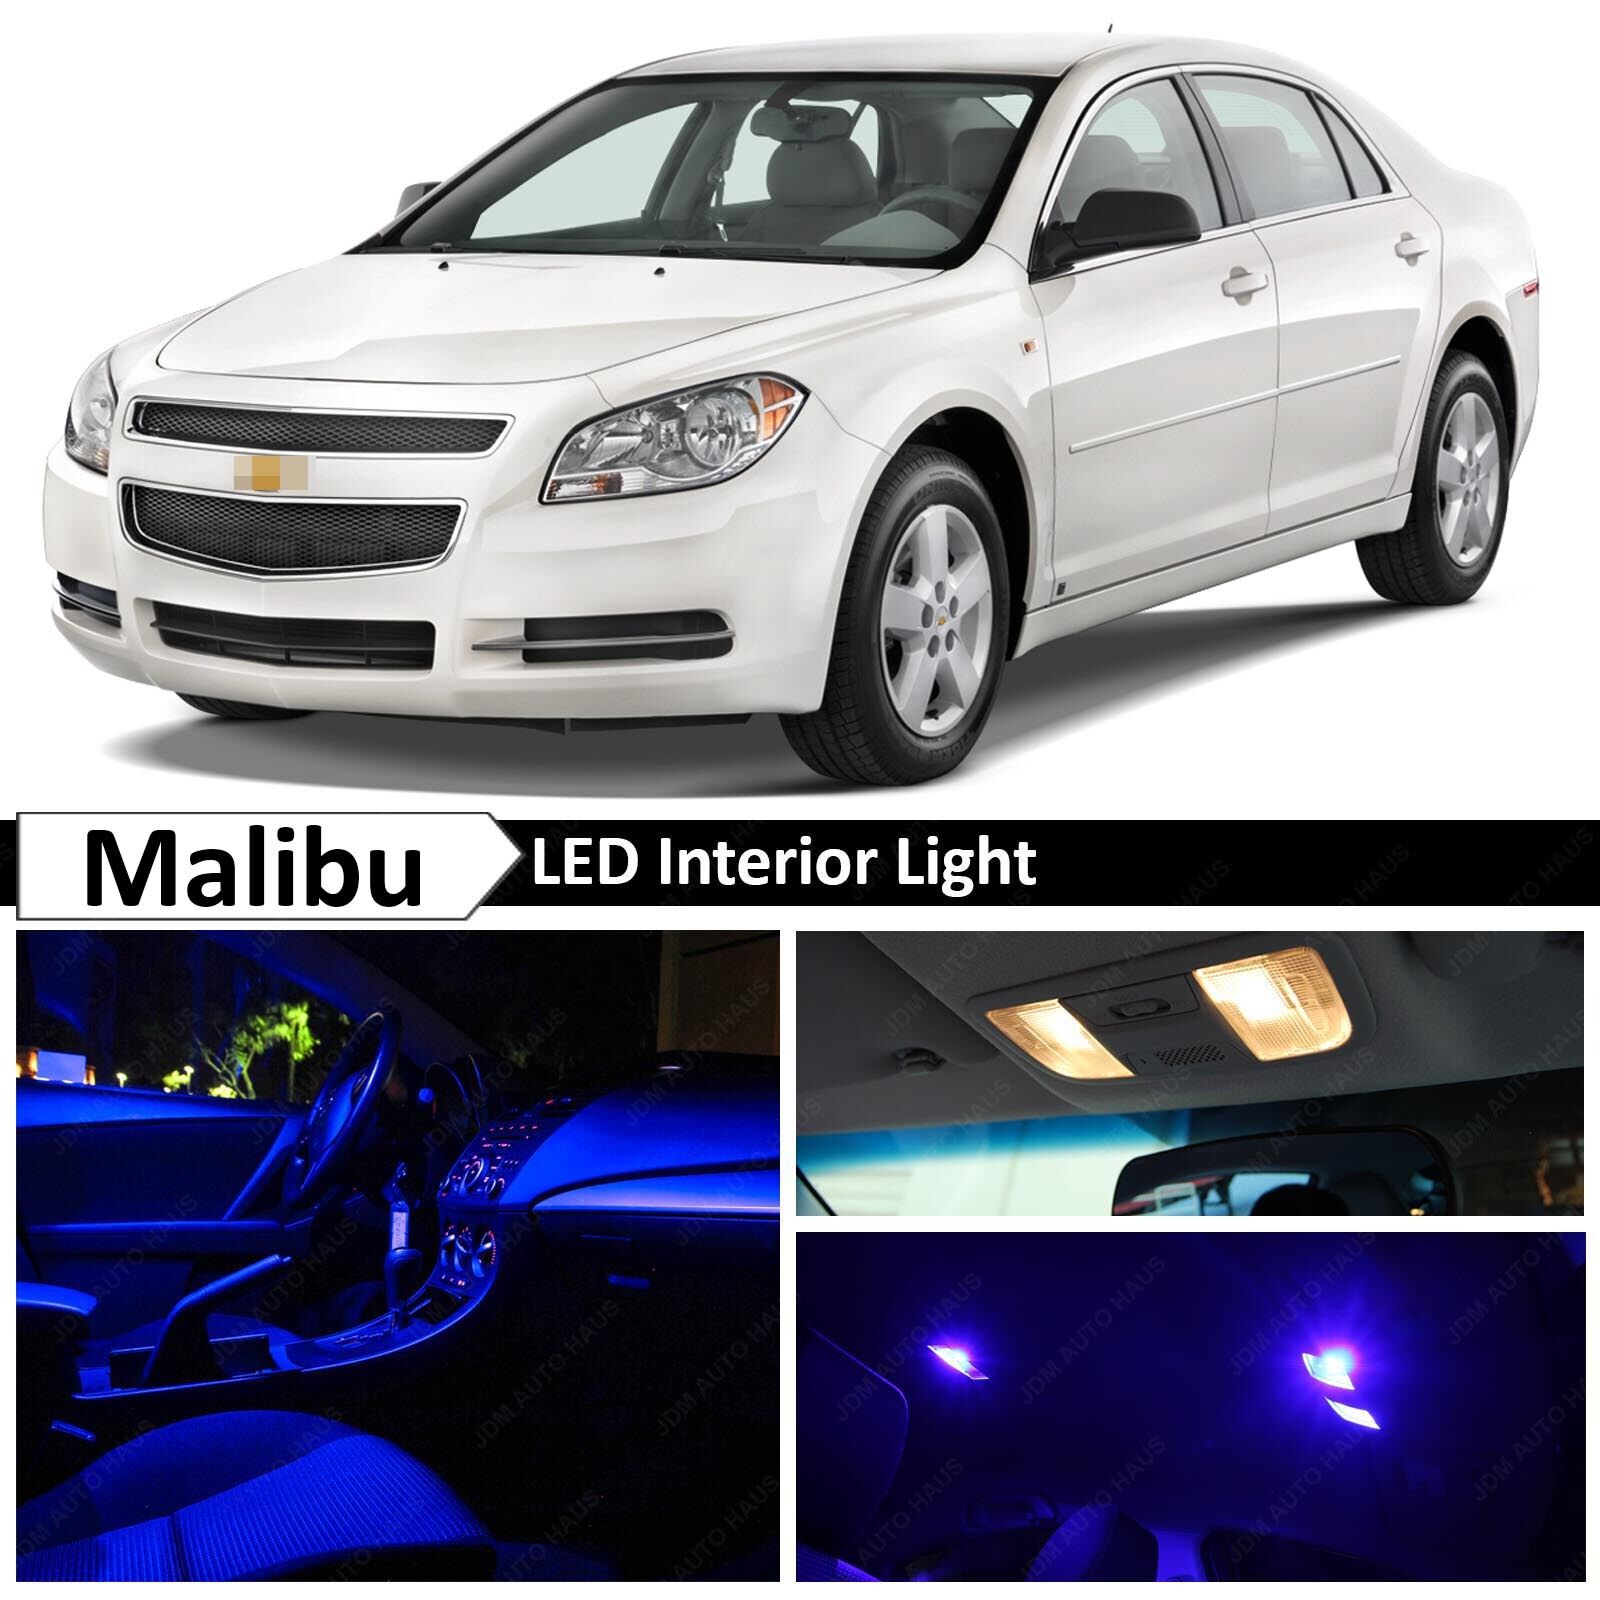 11x Blue Interior LED Lights Package Kit for 2008-2012 Chevy Malibu